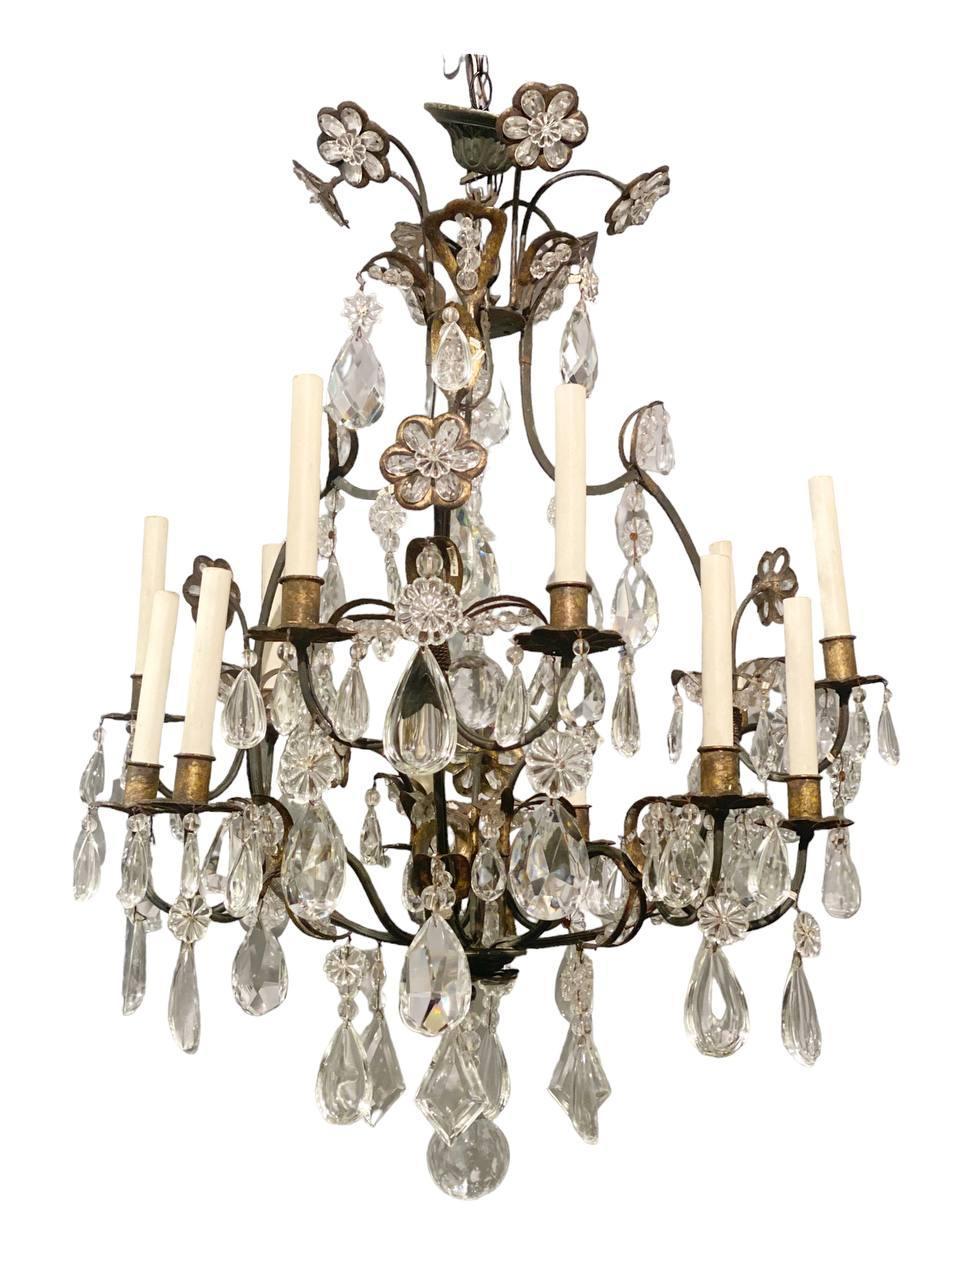 A circa 1930's French gilt metal with crystal flowers and hangings chandelier, 12 lights